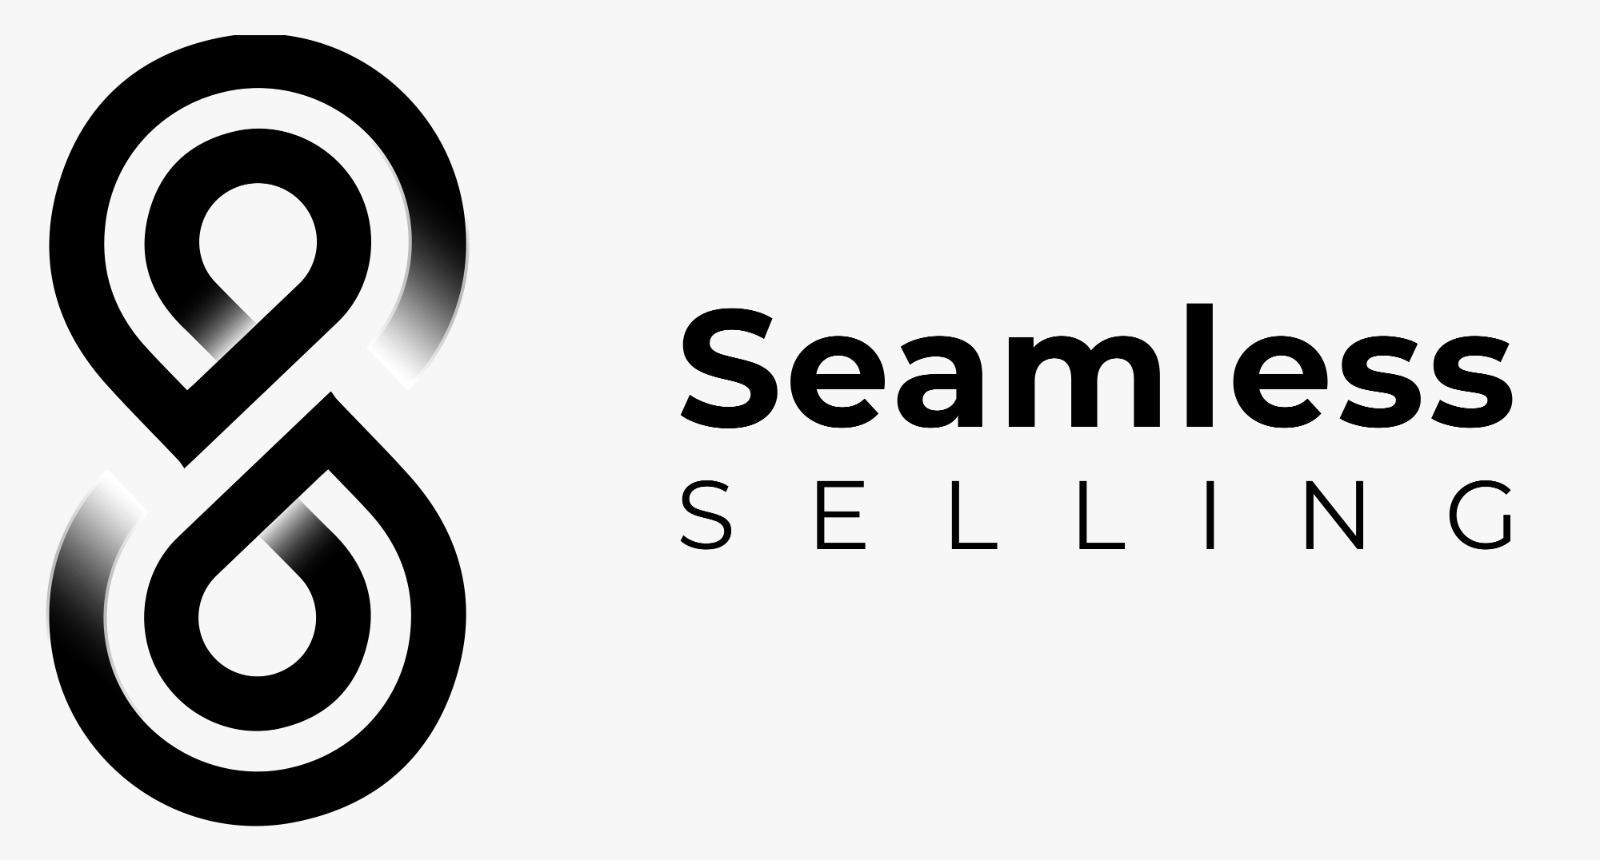 Seamless Selling - Helping coaches to grow their businesses